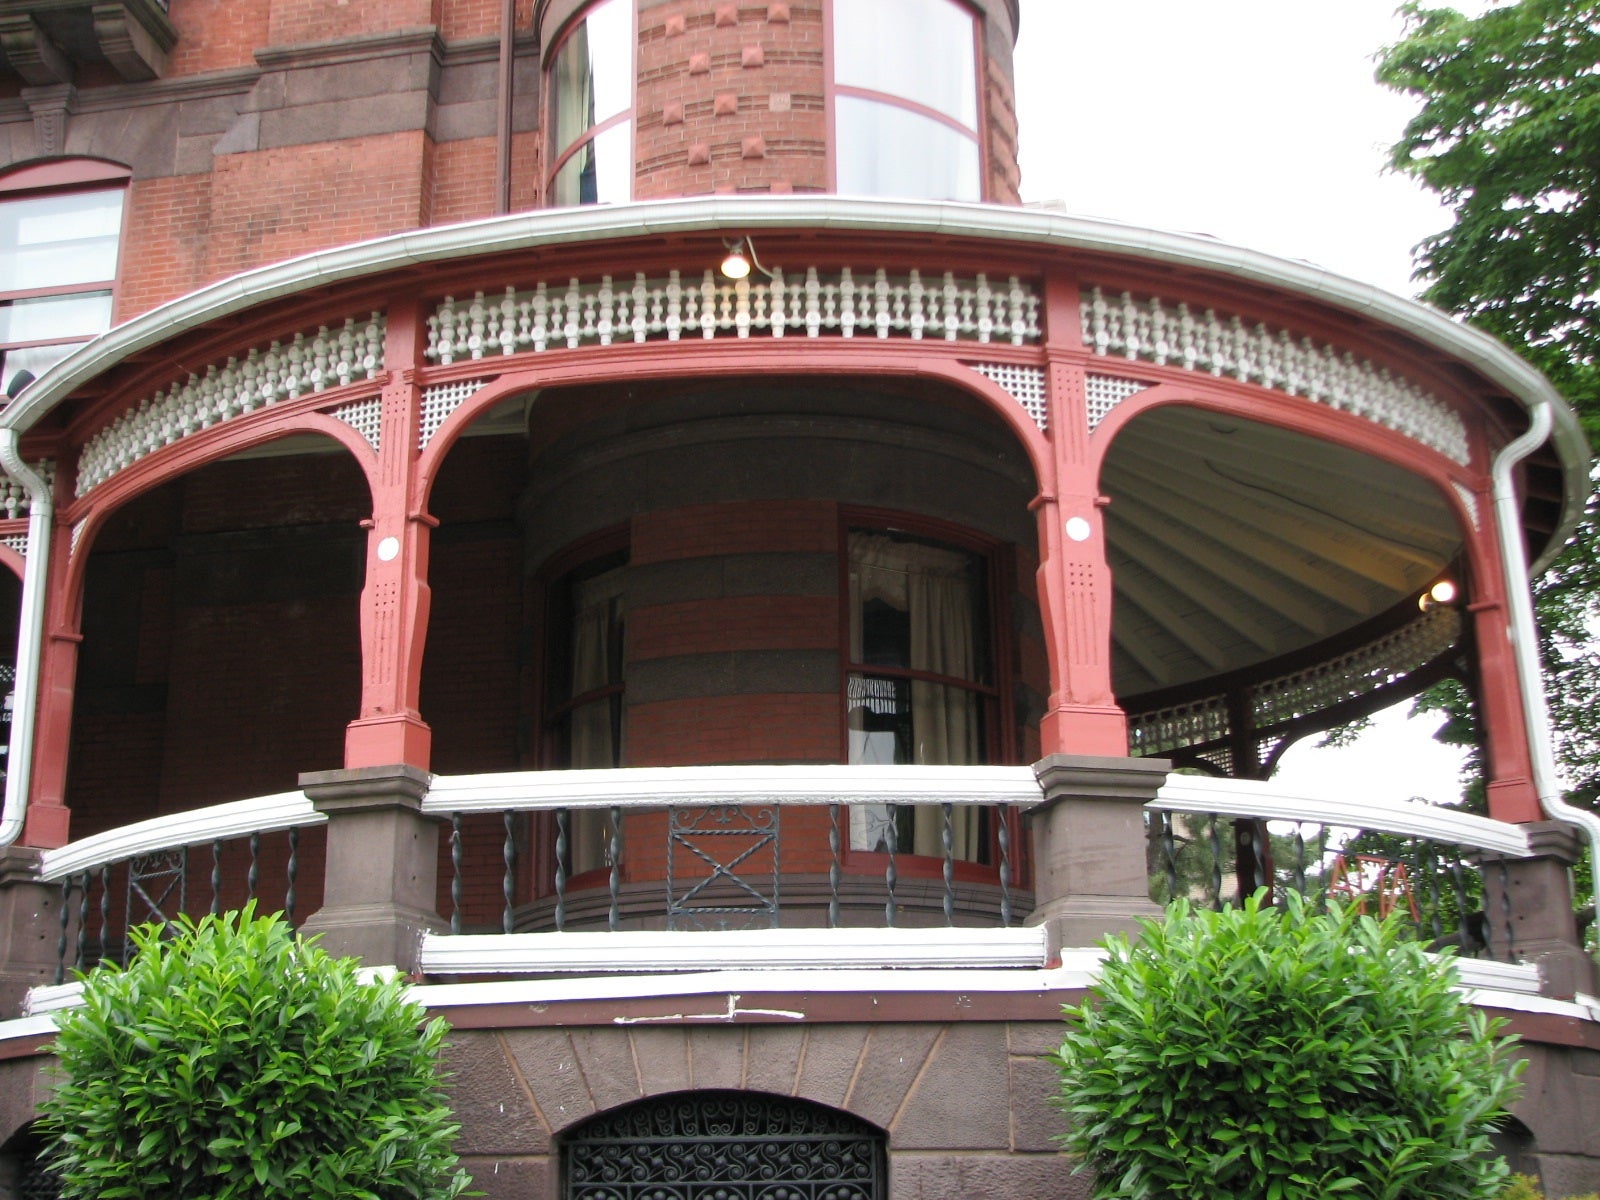 The ornate Victorian porch rolls around the front and side of the house.